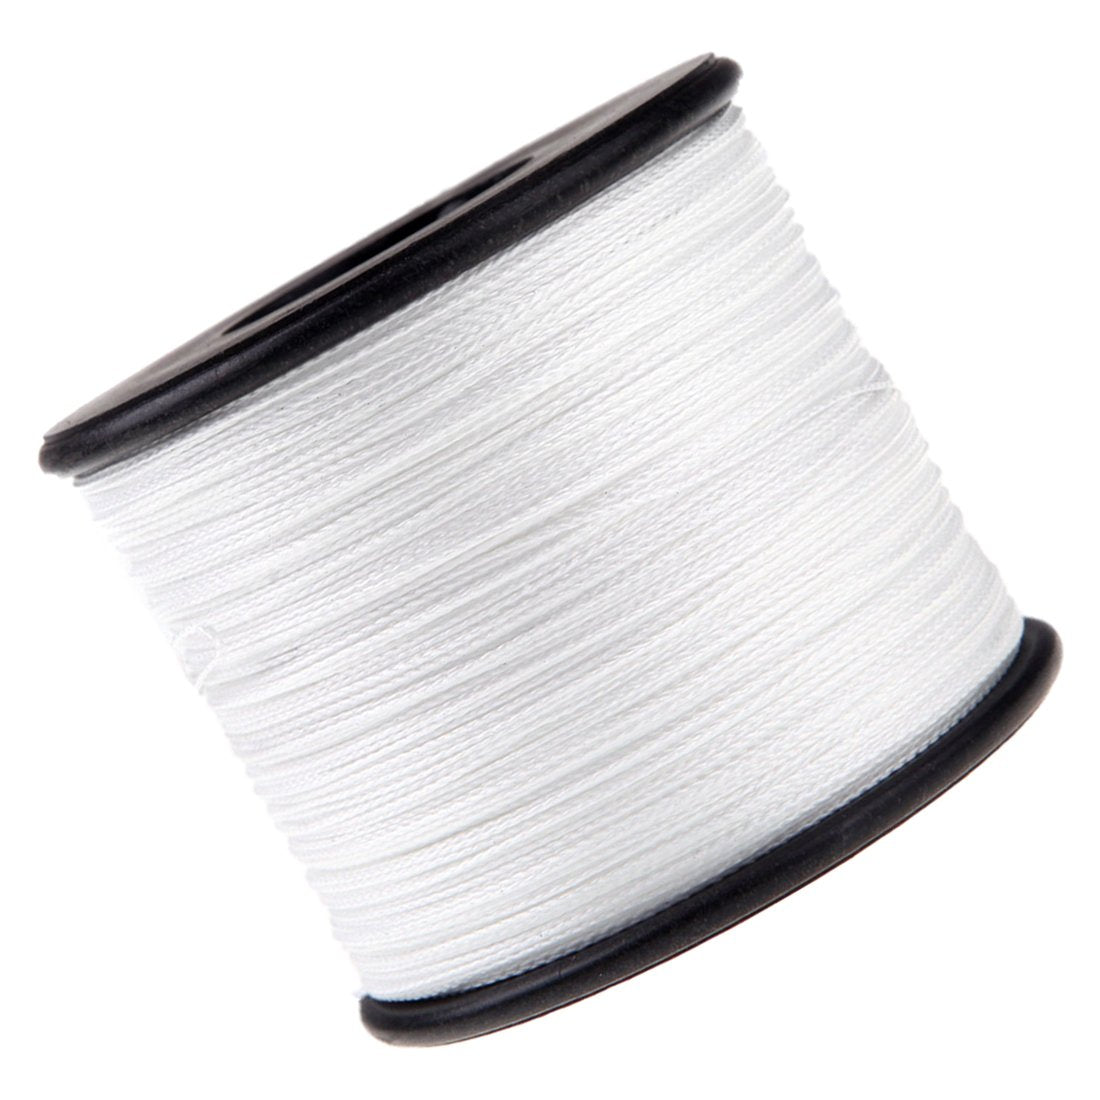 Cgds 500M 100Lb 0.5Mm Super Strong Braided Fishing Line Pe 4 Strands Color:White-China Good Deal Store-Bargain Bait Box